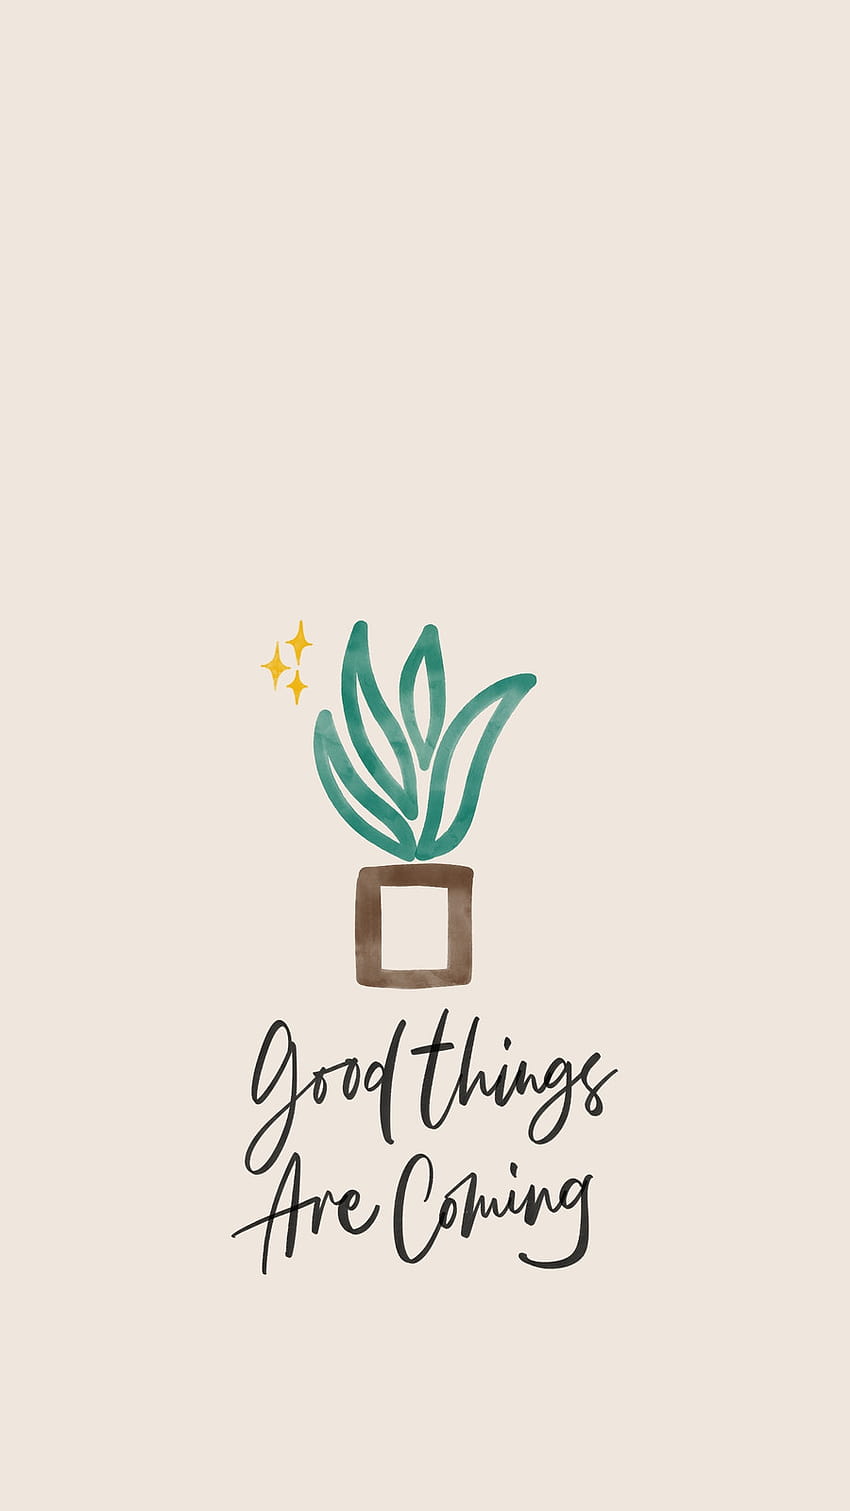 Beige Brown Aesthetic Minimalist Good Things Are Coming Handwritten Motivational Quote Phone, beige minimalist aesthetic HD phone wallpaper